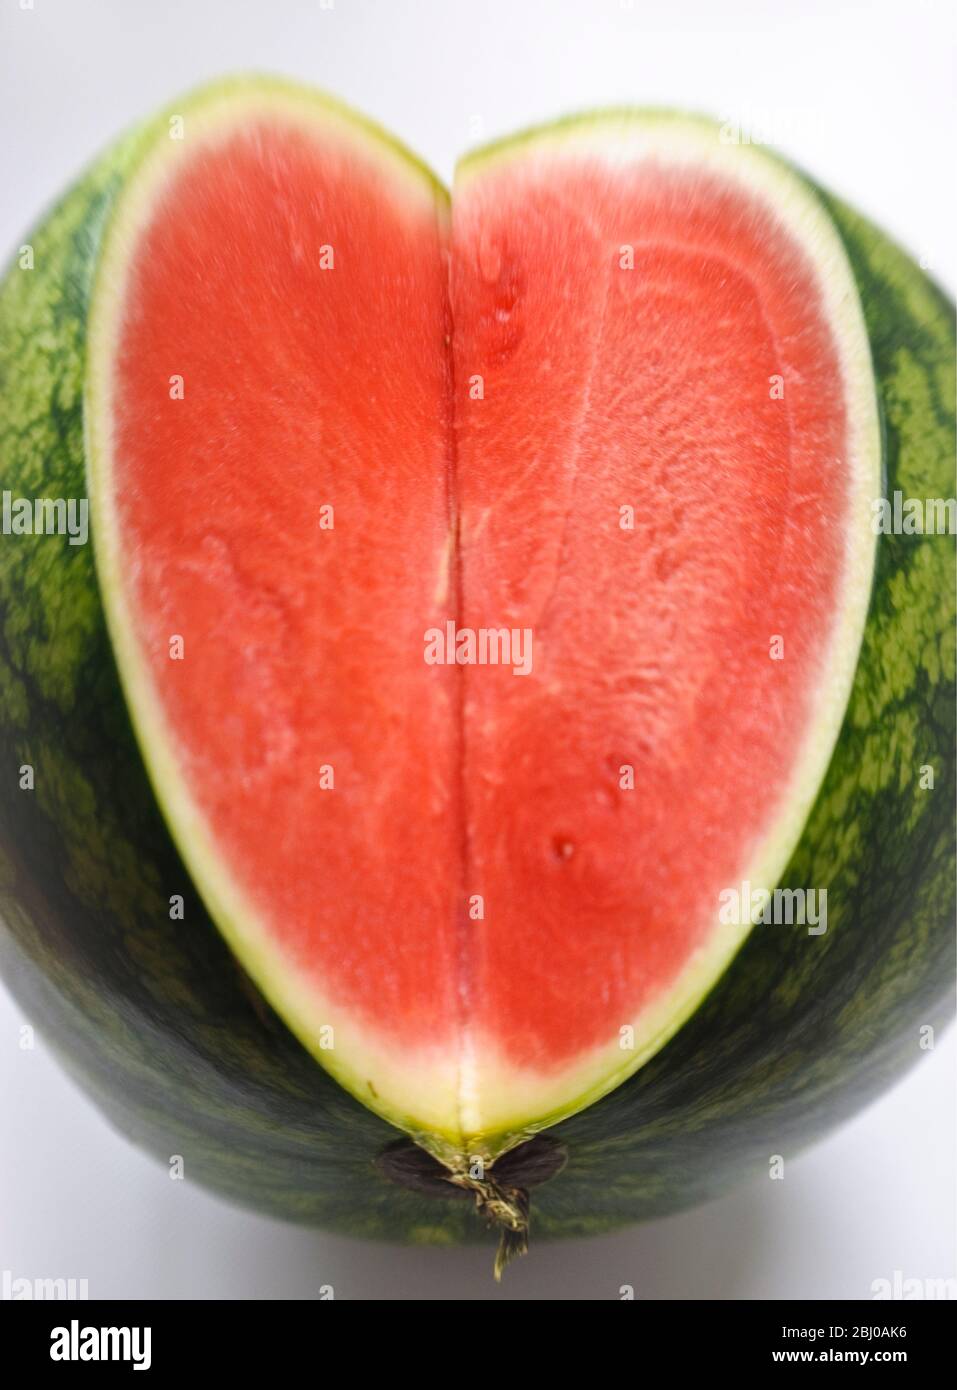 Cut face of watermelon showing flesh and seeds in interior - Stock Photo